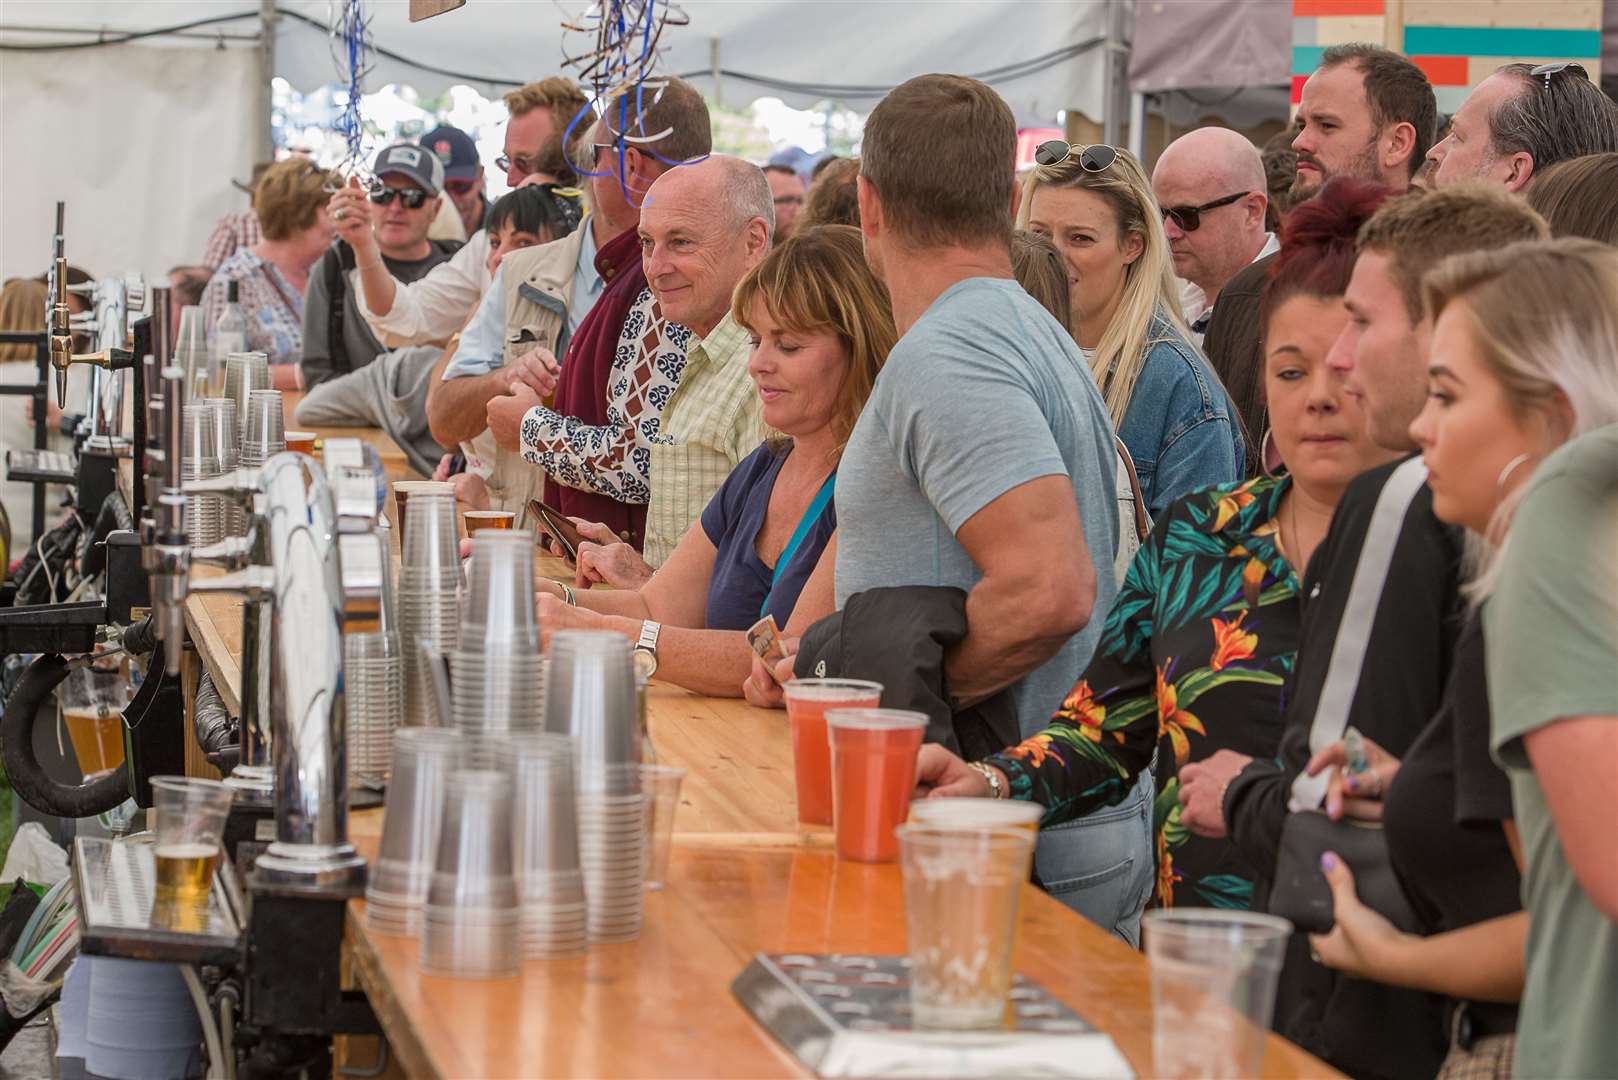 Event organisers know the more people spending on food and drink helps swell their bottom line